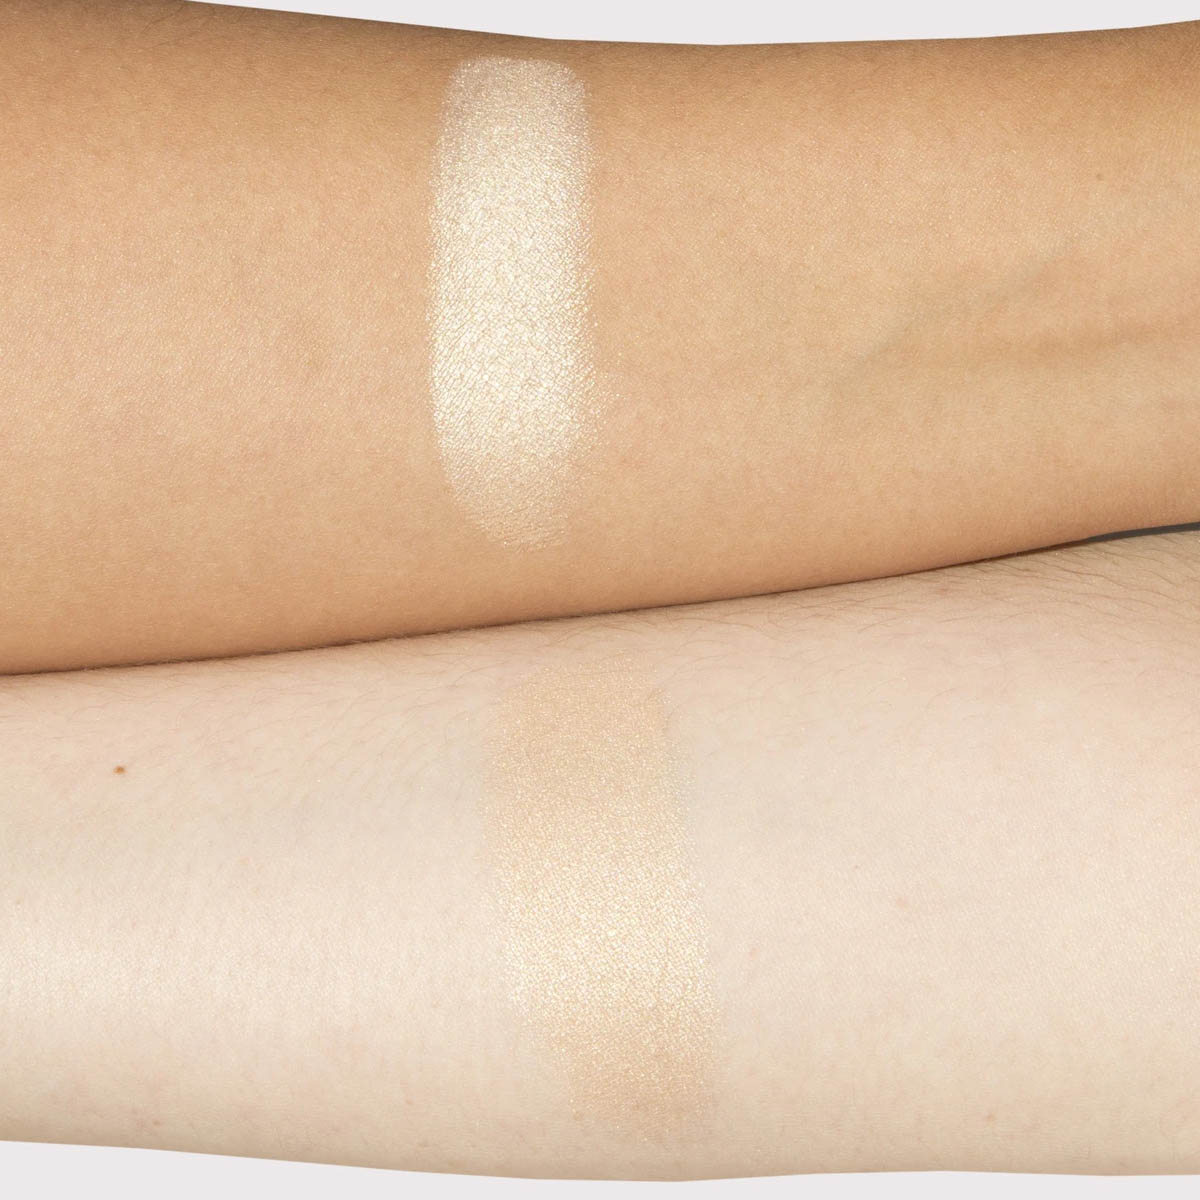 THEBALM Mary-Lou Manizer Highlighter Swatches